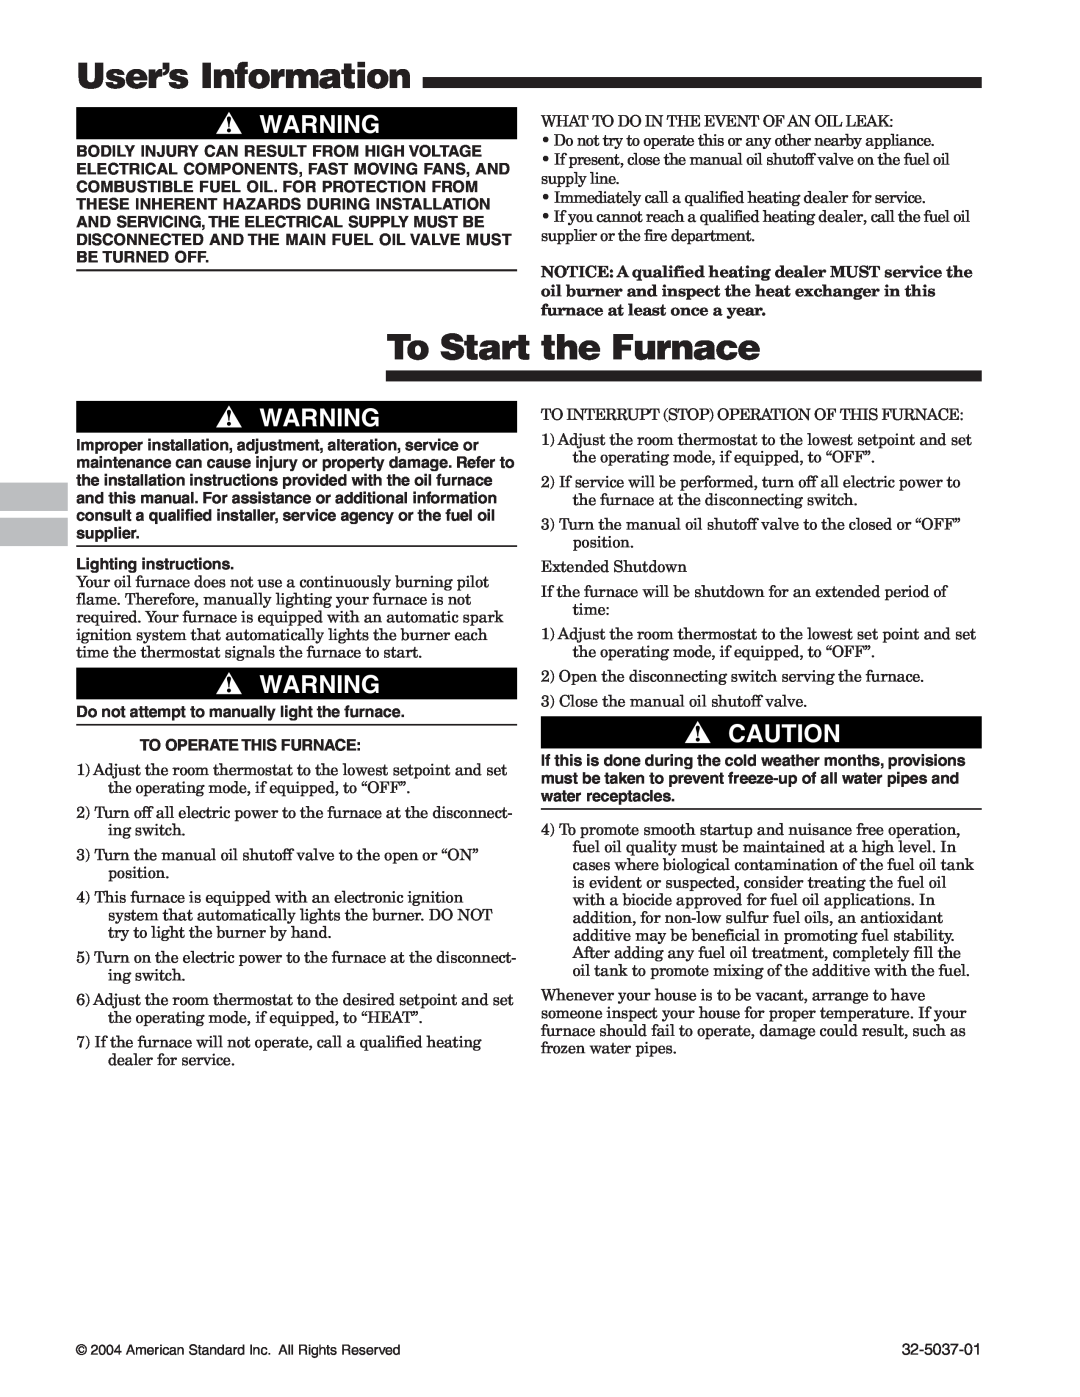 American Standard 32-5037-01 User’s Information, To Start the Furnace, Lighting instructions, To Operate This Furnace 